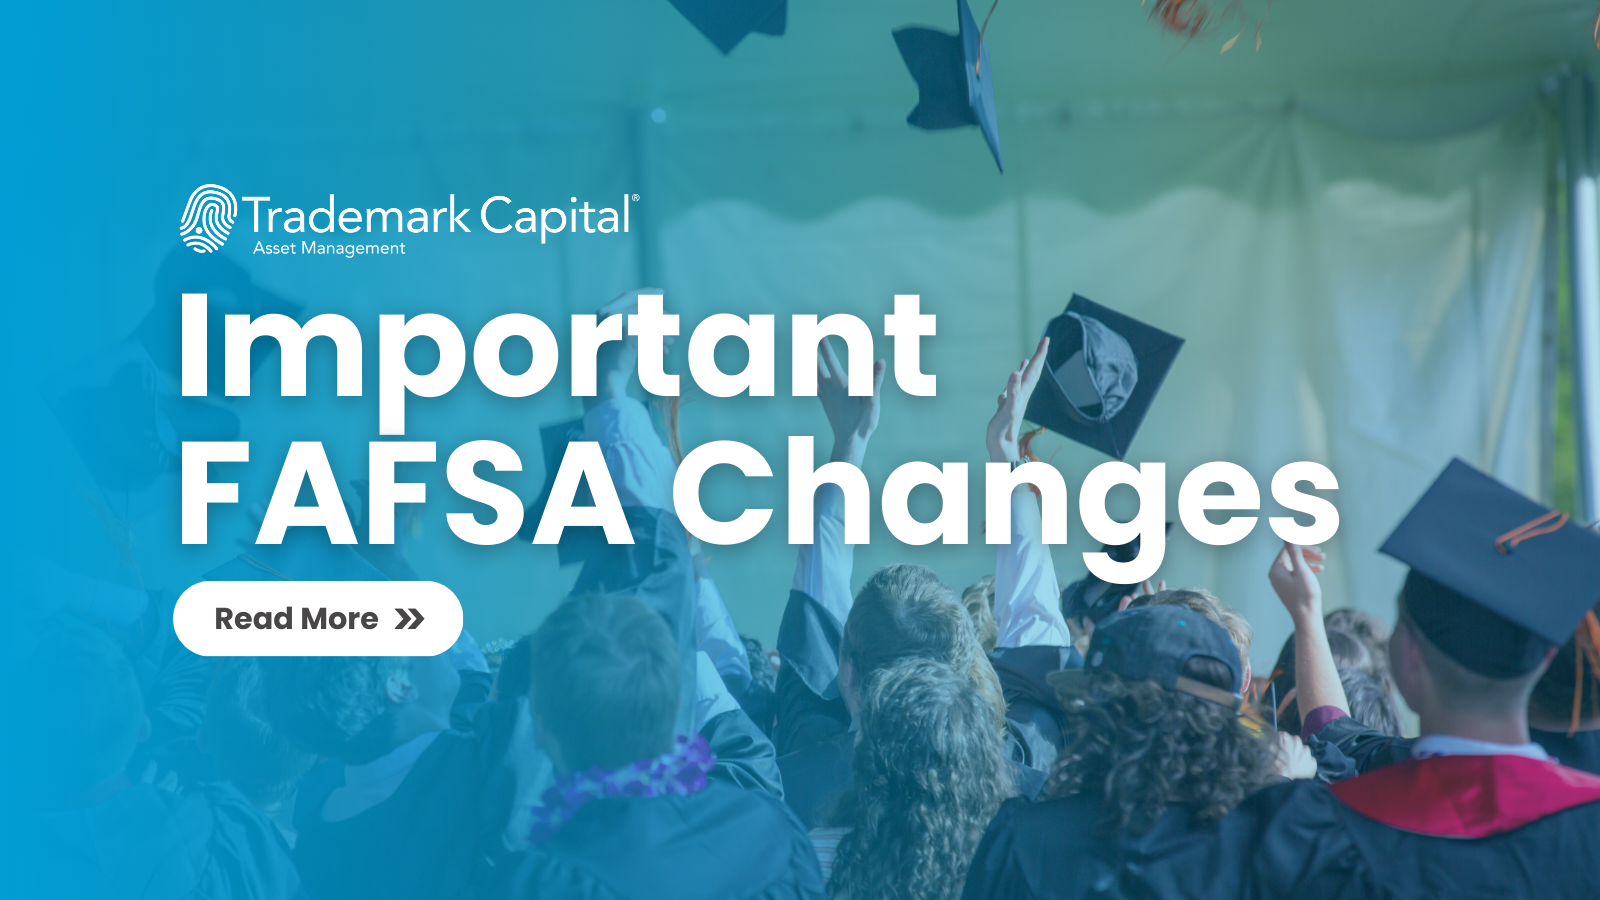 Important FAFSA Changes